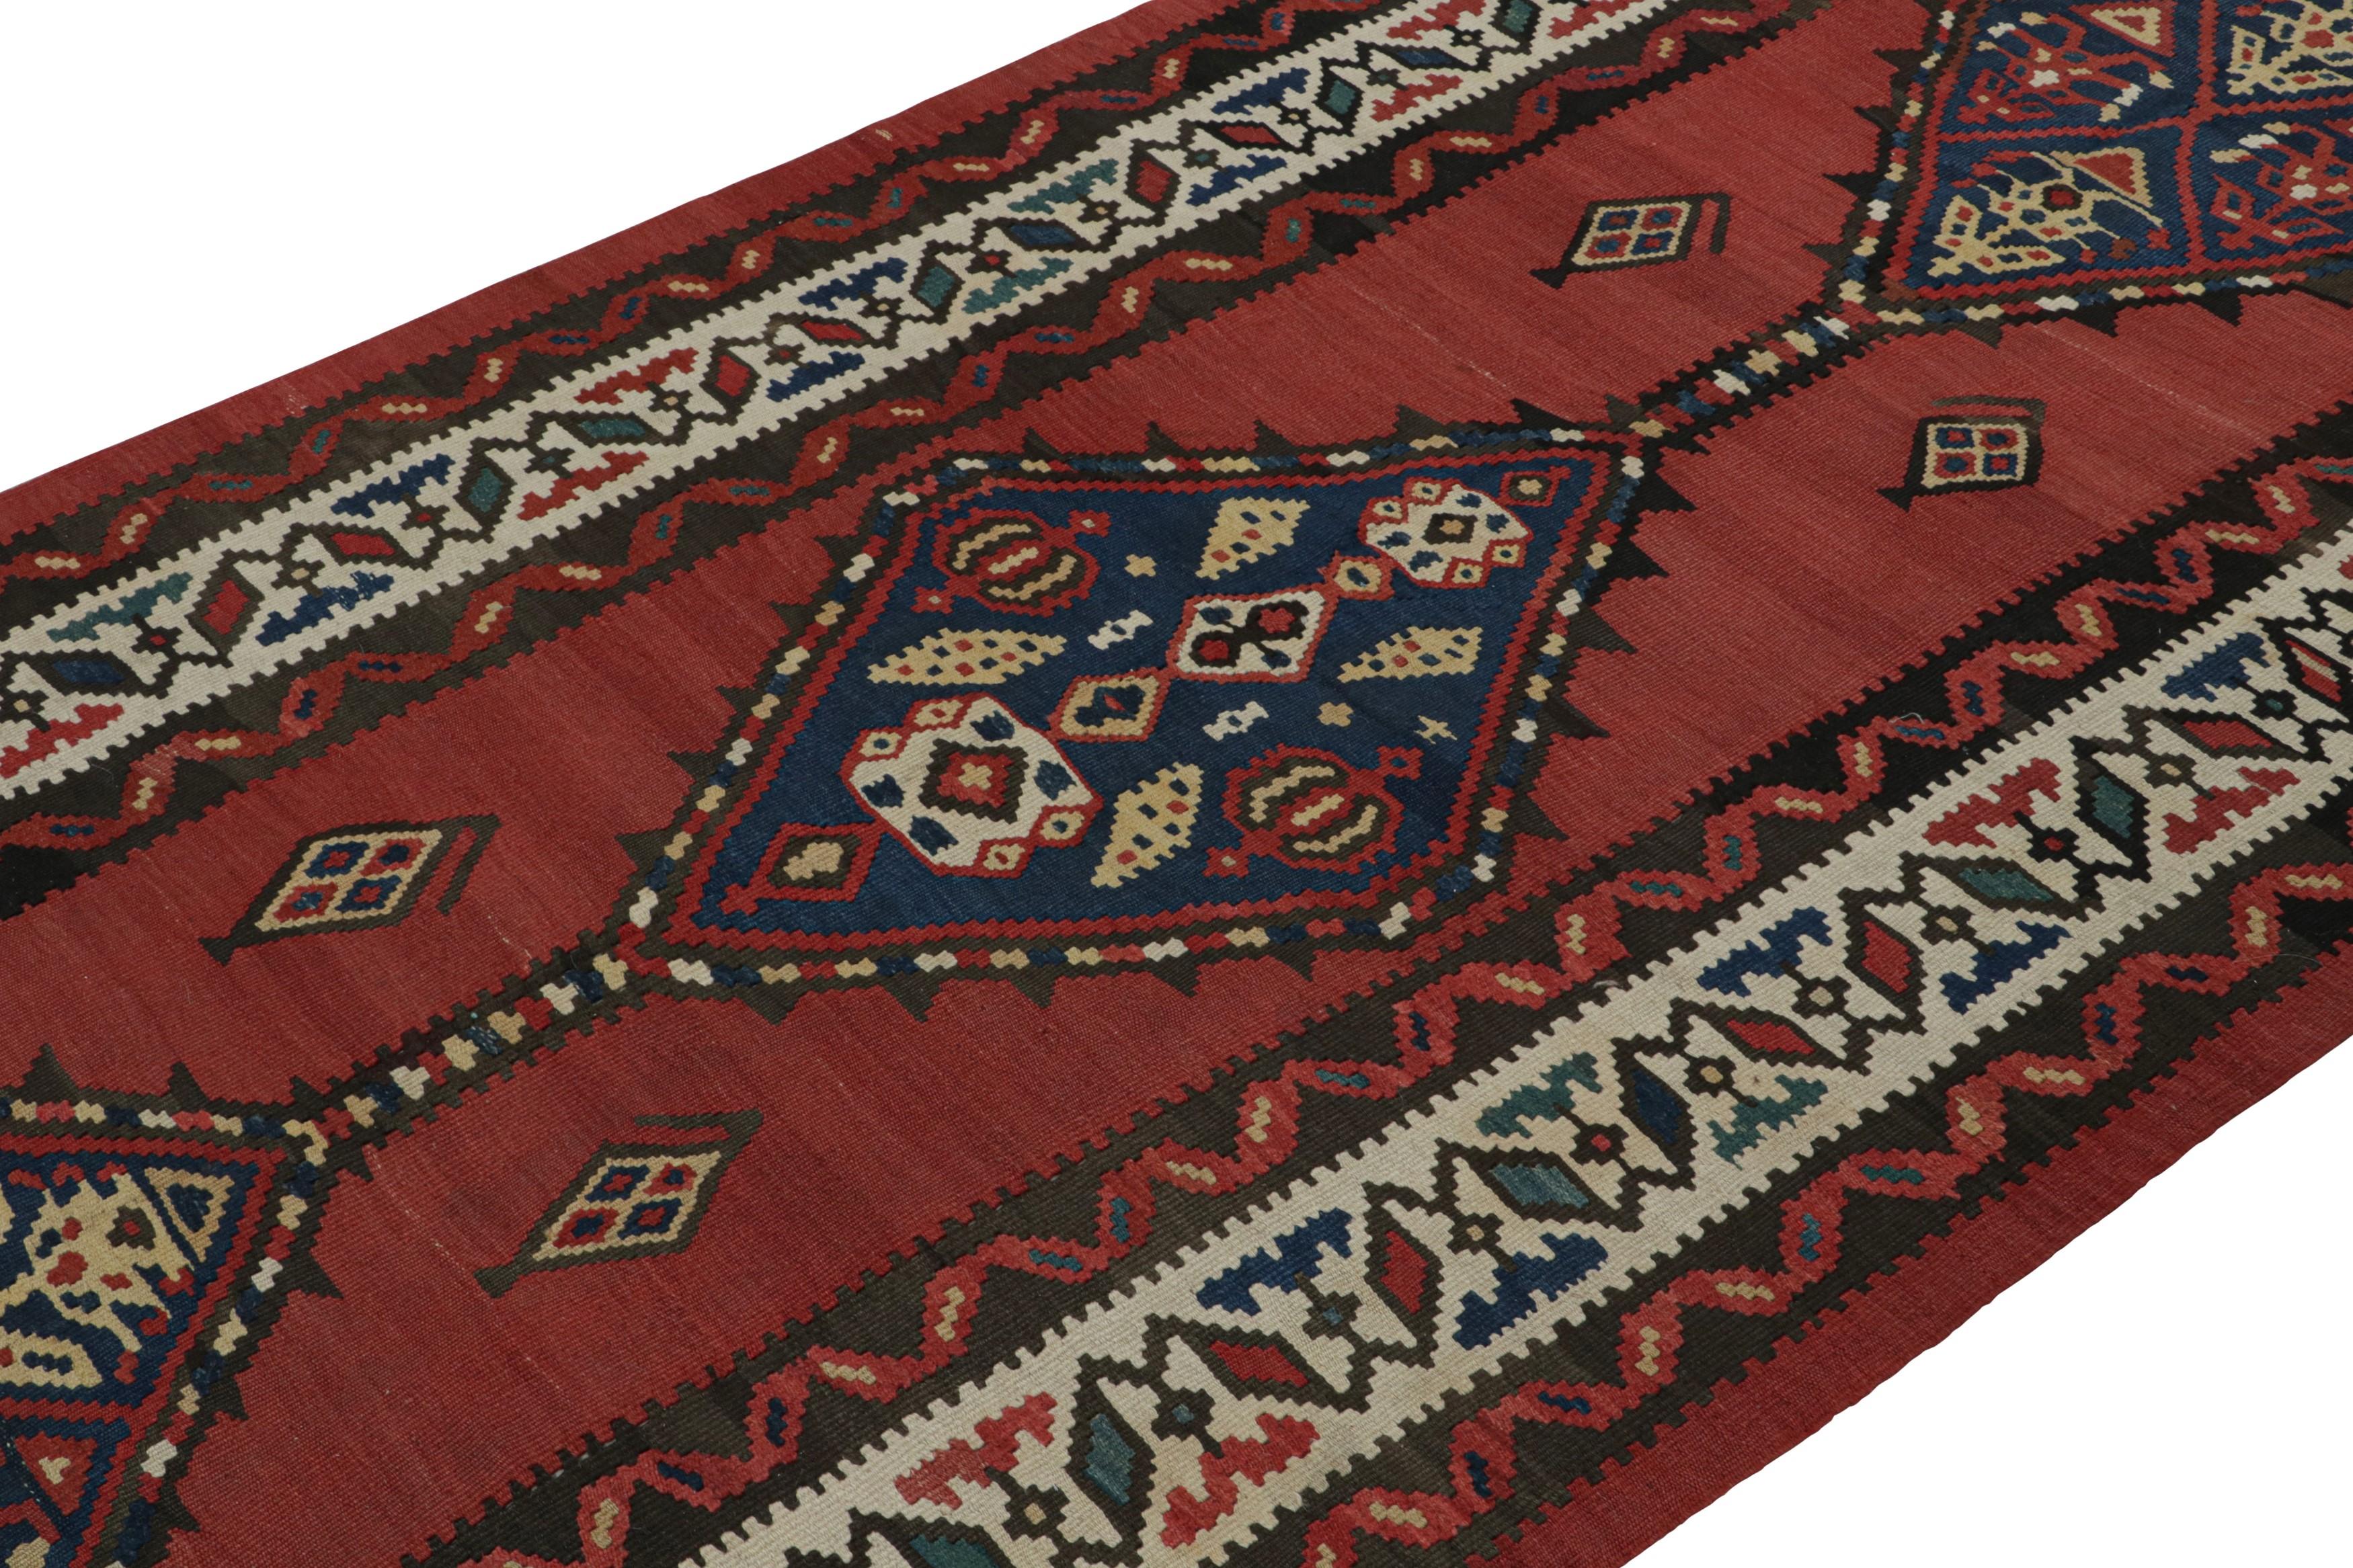 Hand-Woven Vintage Persian tribal Kilim Runner rug with Medallions from Rug & Kilim For Sale